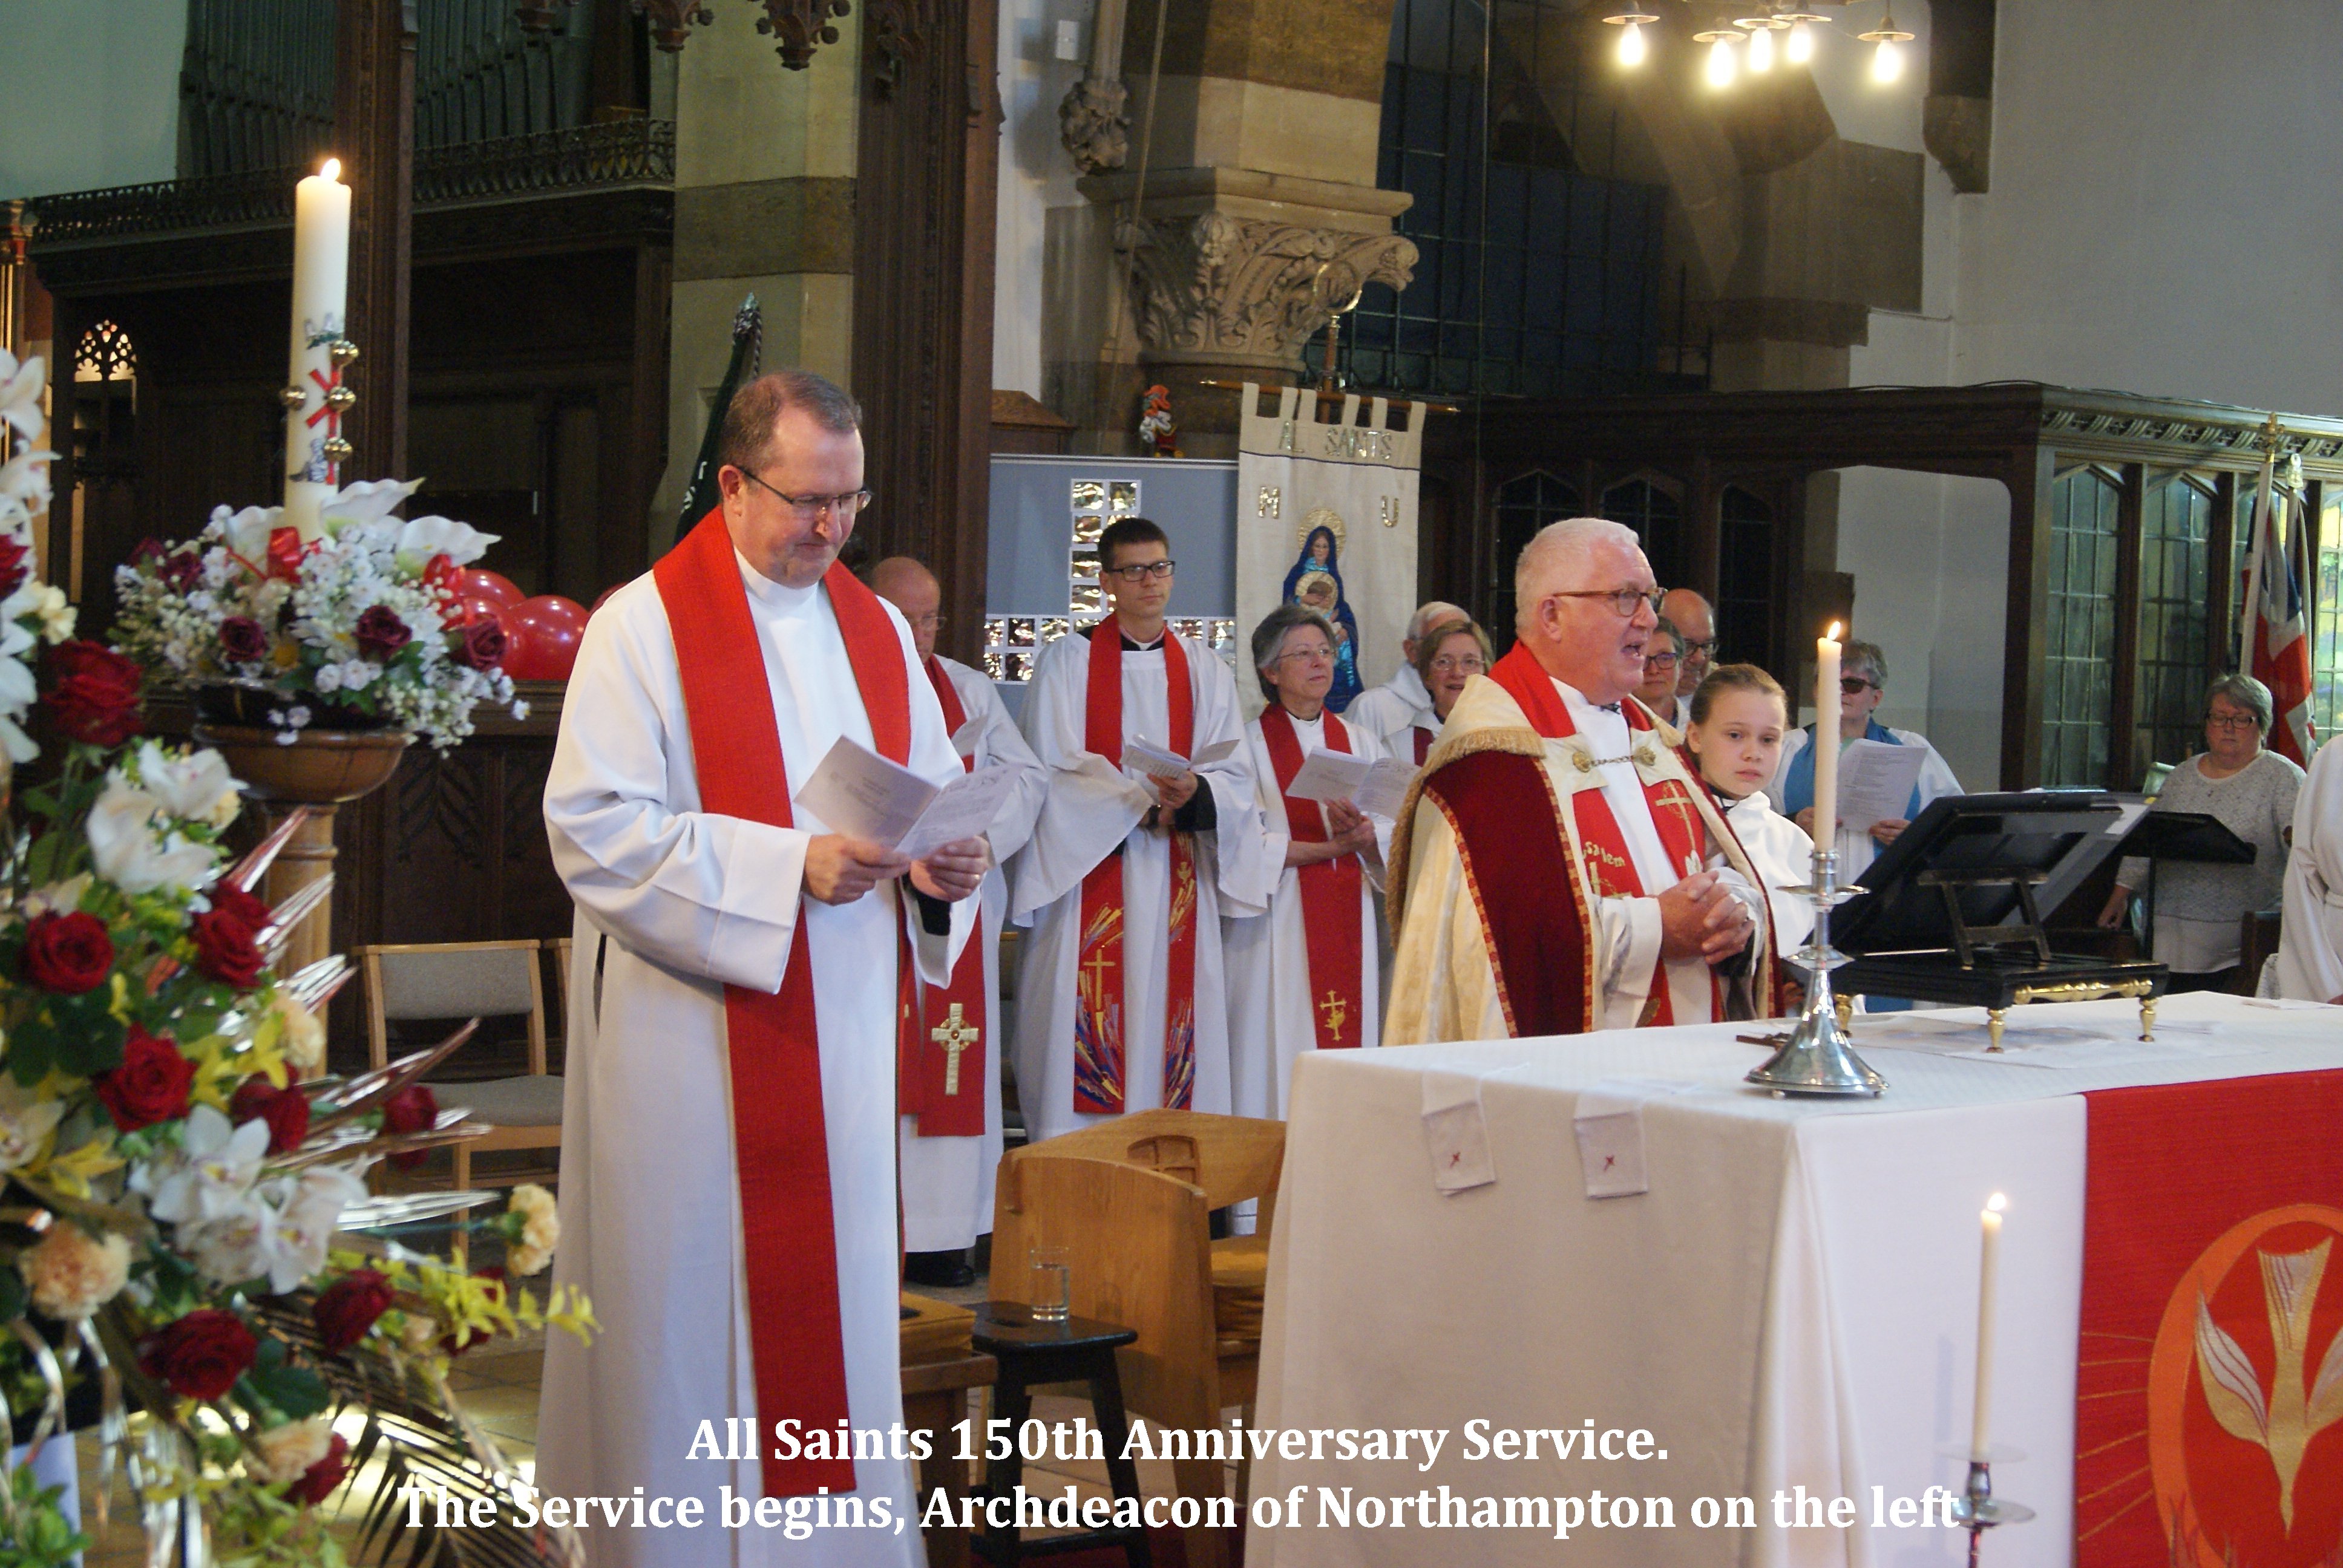 (008) The Service begins, Archdeacon of Nortampton on the left